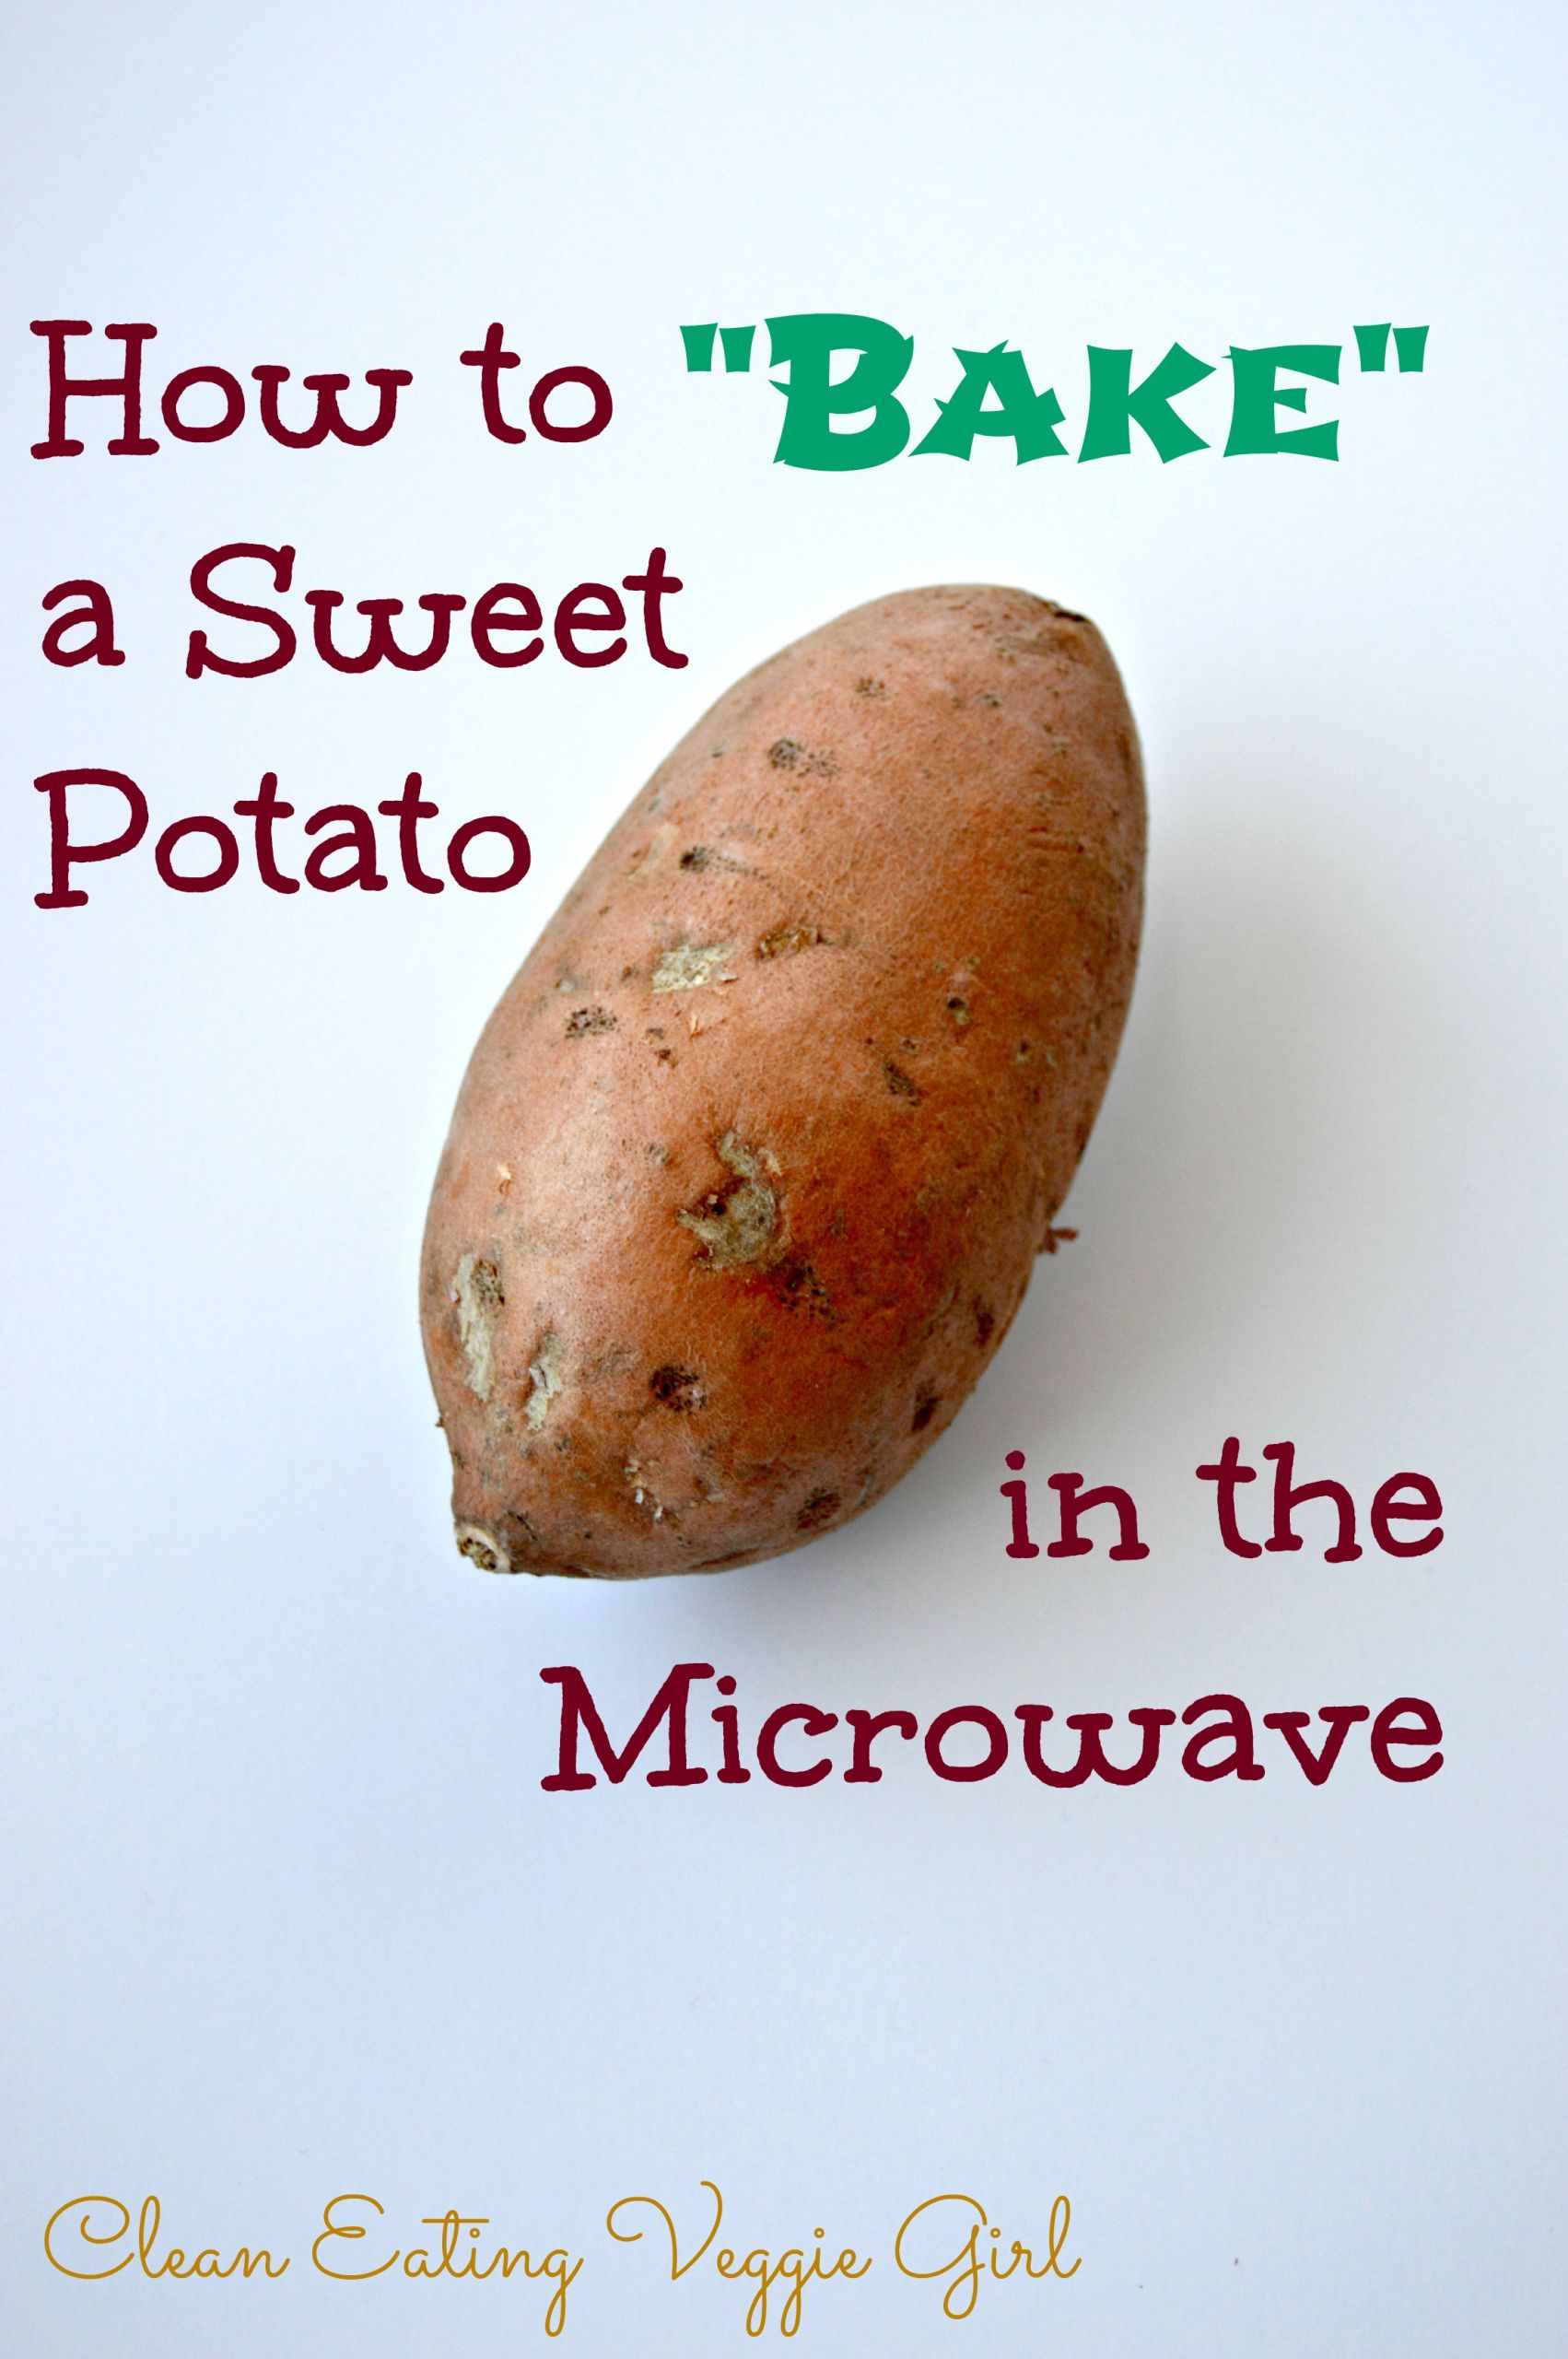 Cook Sweet Potato In Microwave Inspirational How to Make A Baked Sweet Potato In the Microwave Clean